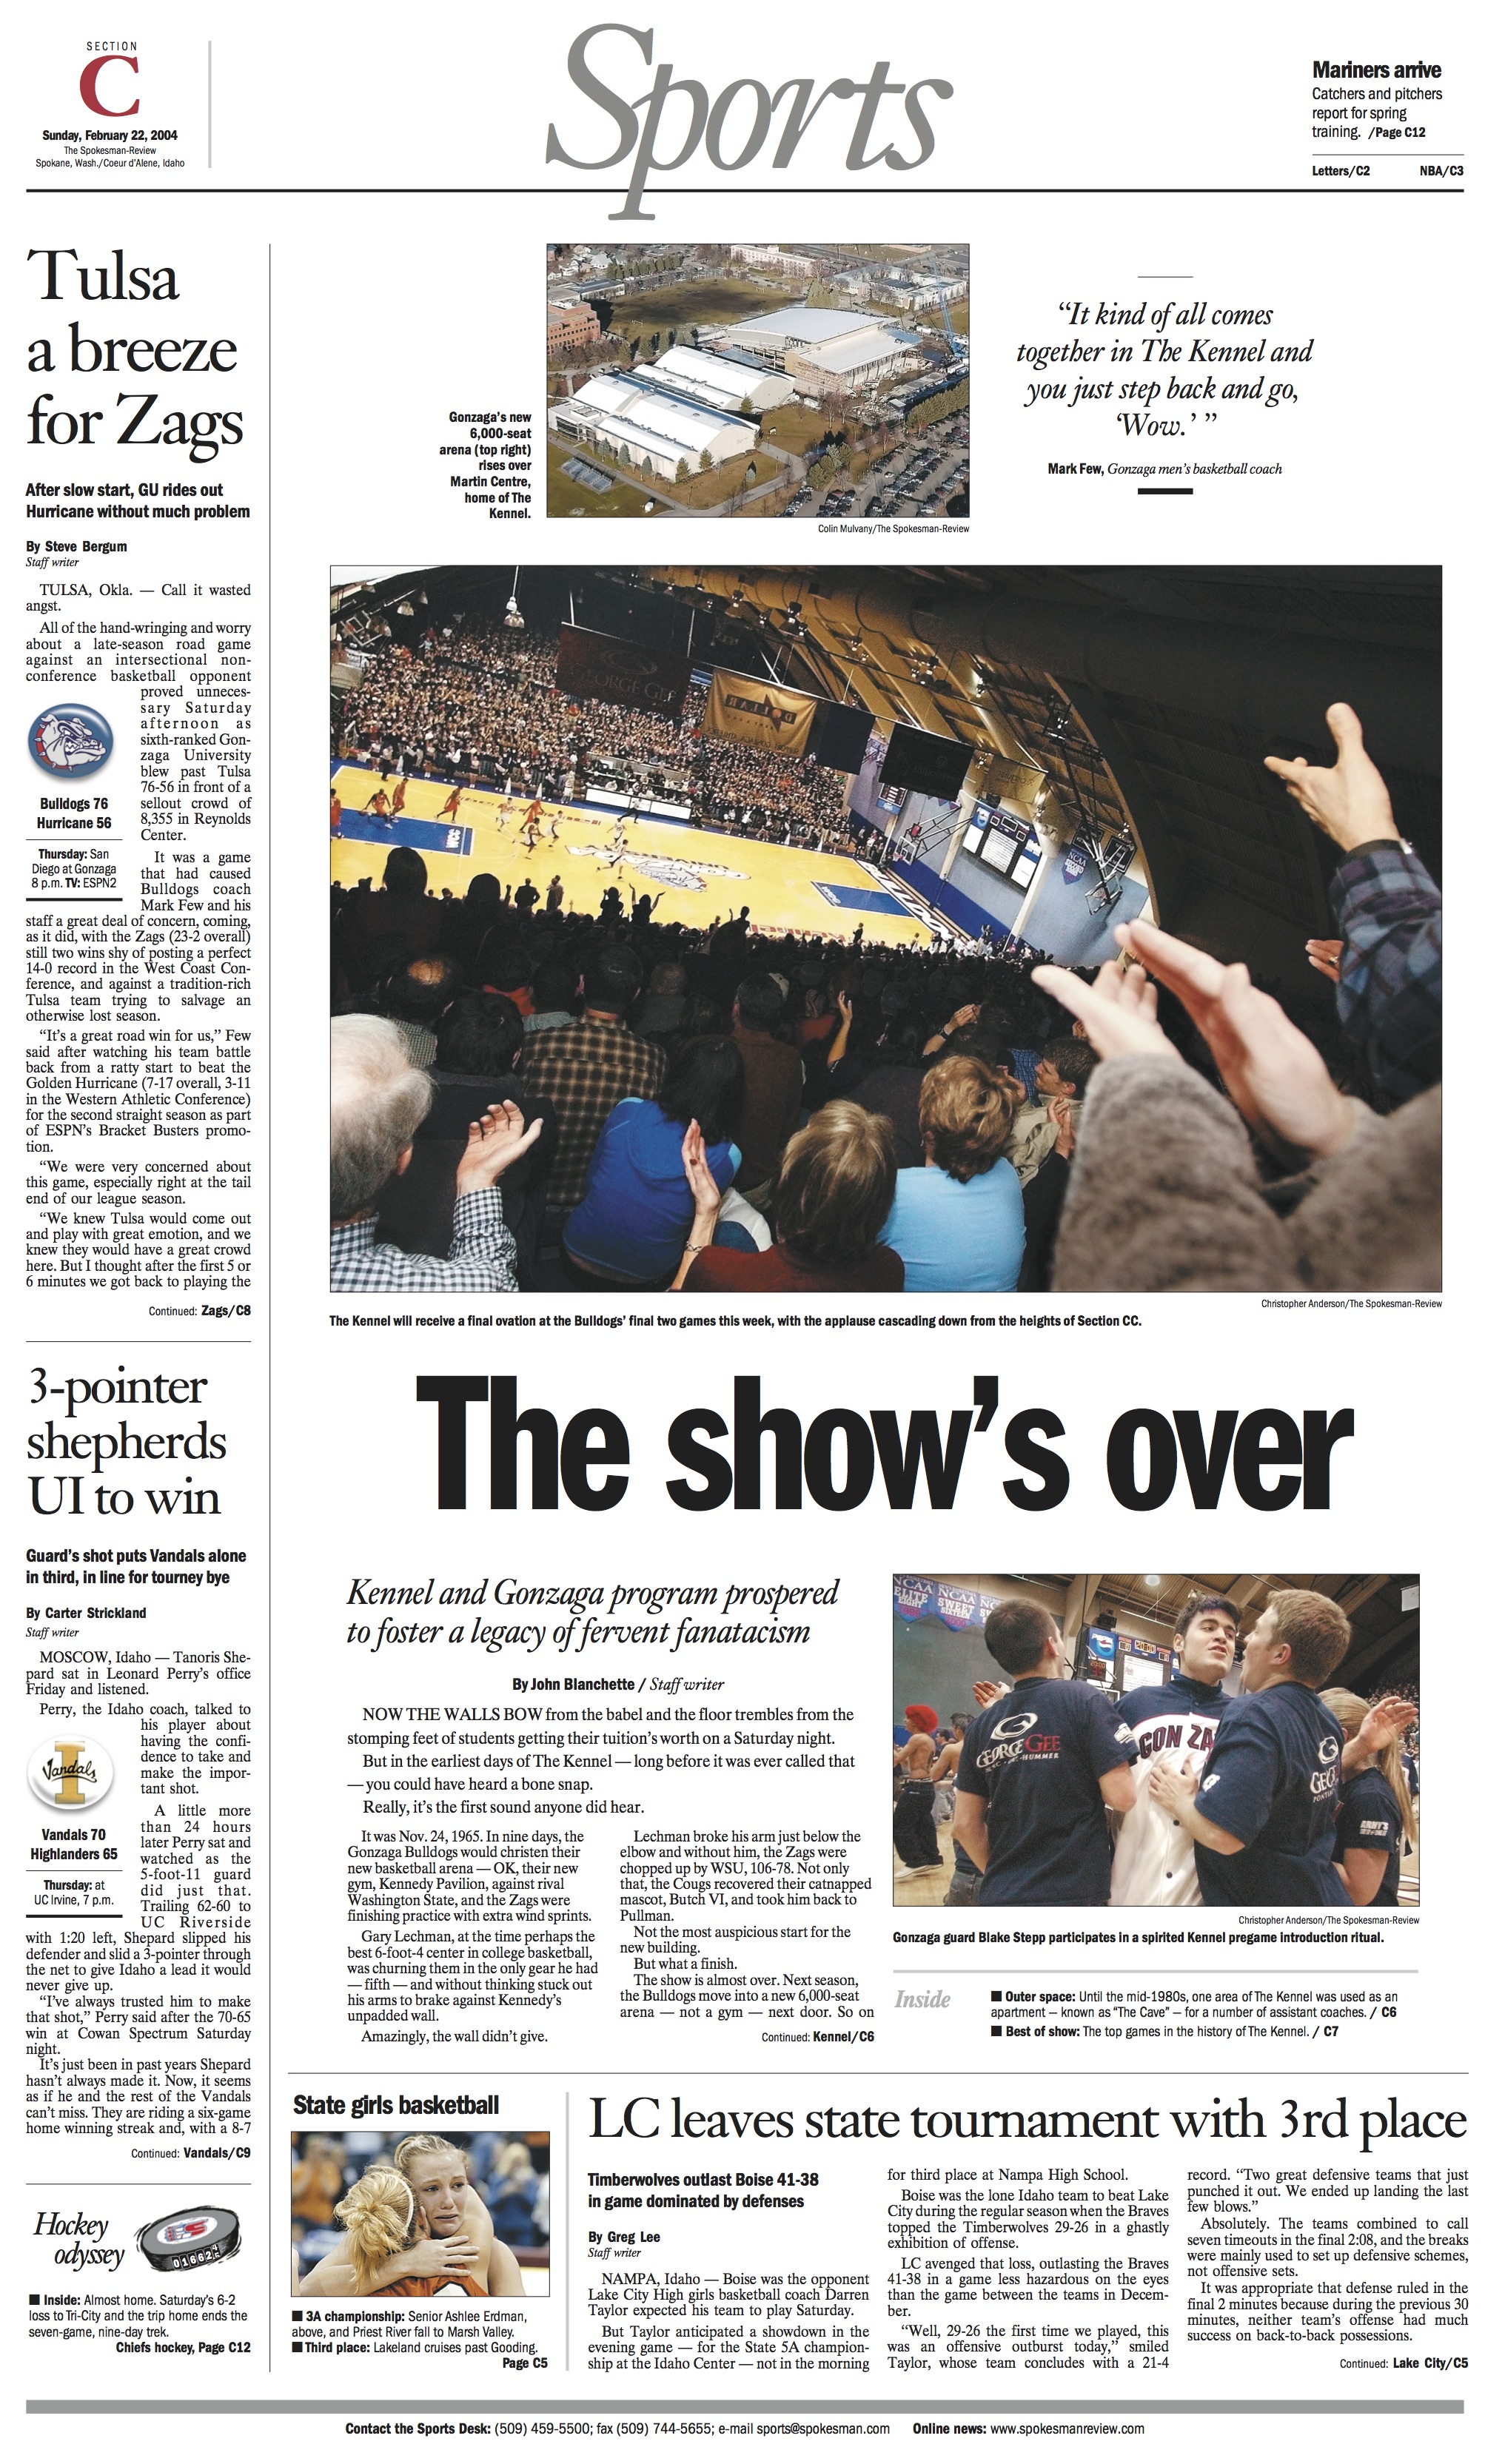 Historic page: Feb. 2, 2004, Kennel farewell